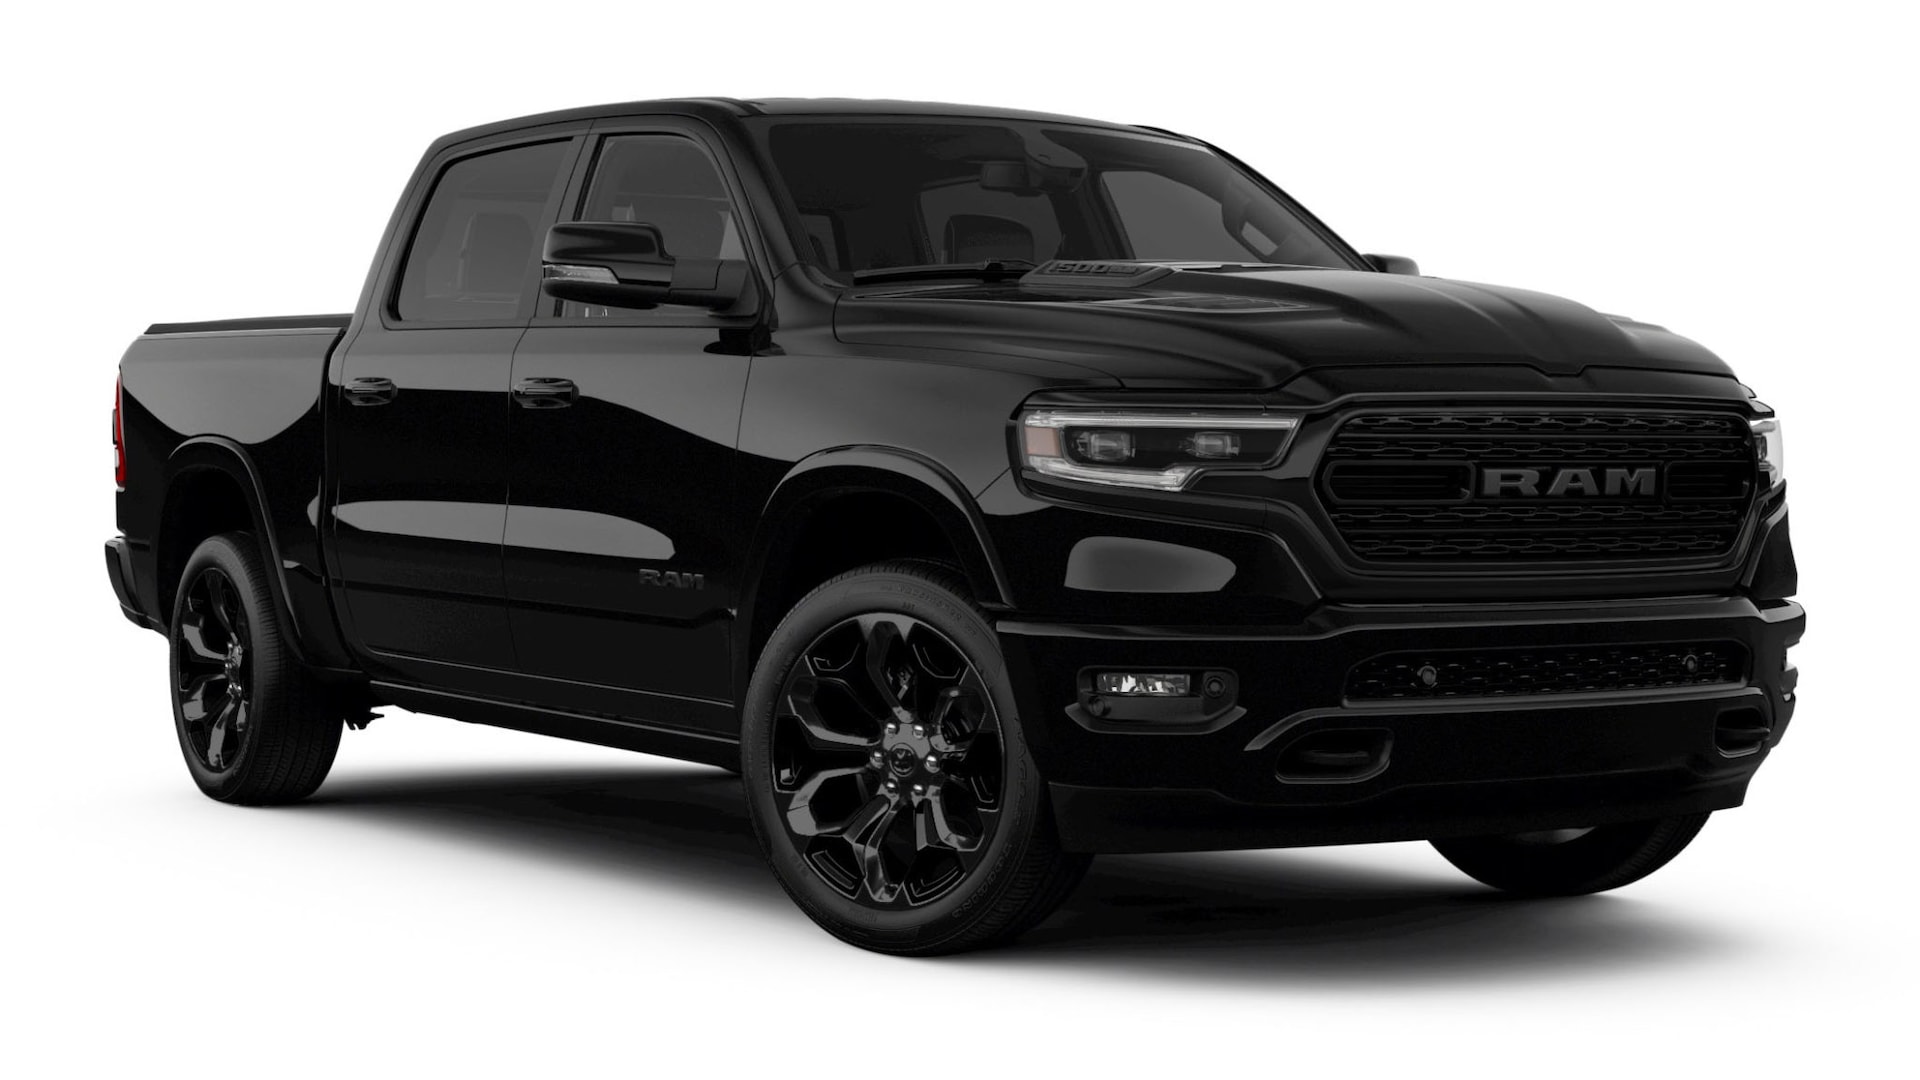 2020 Ram 1500 Limited Gains Stealthy Black Edition